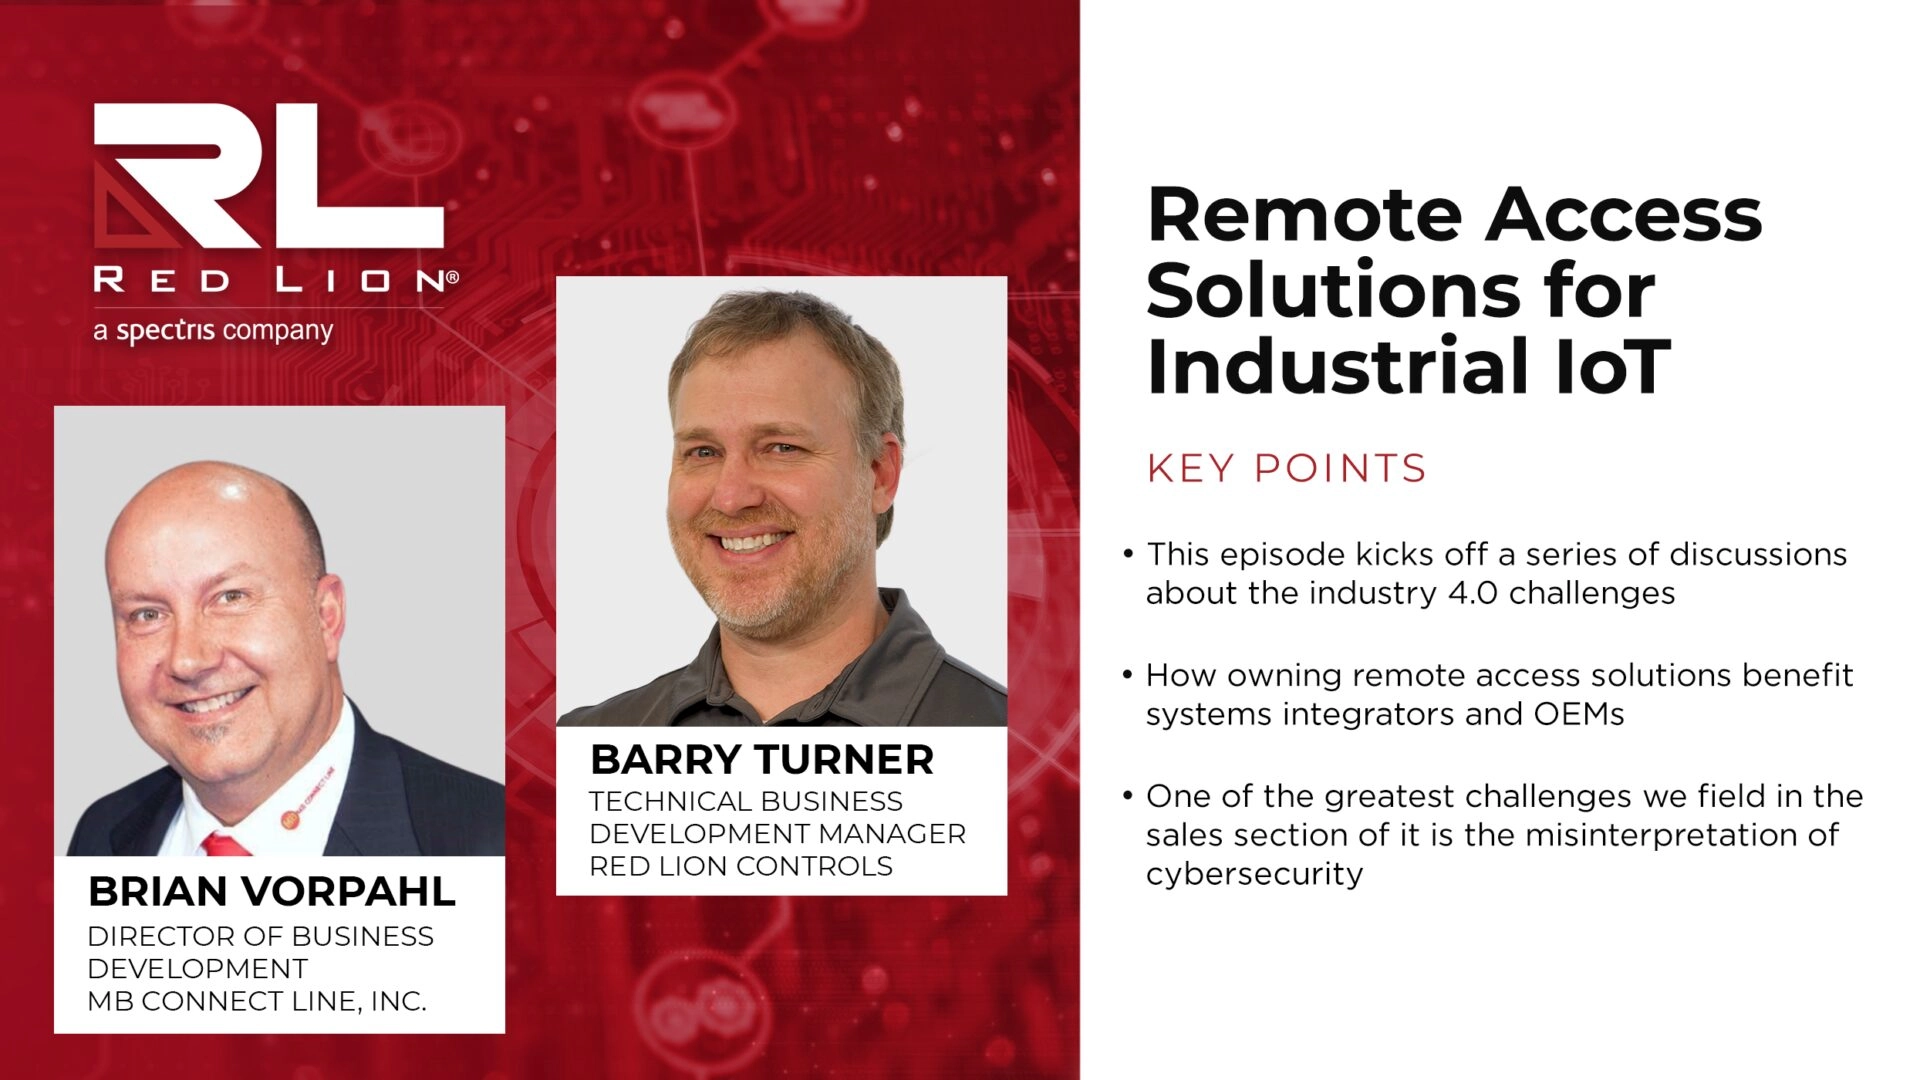 Remote Access Solutions for Industrial IoT